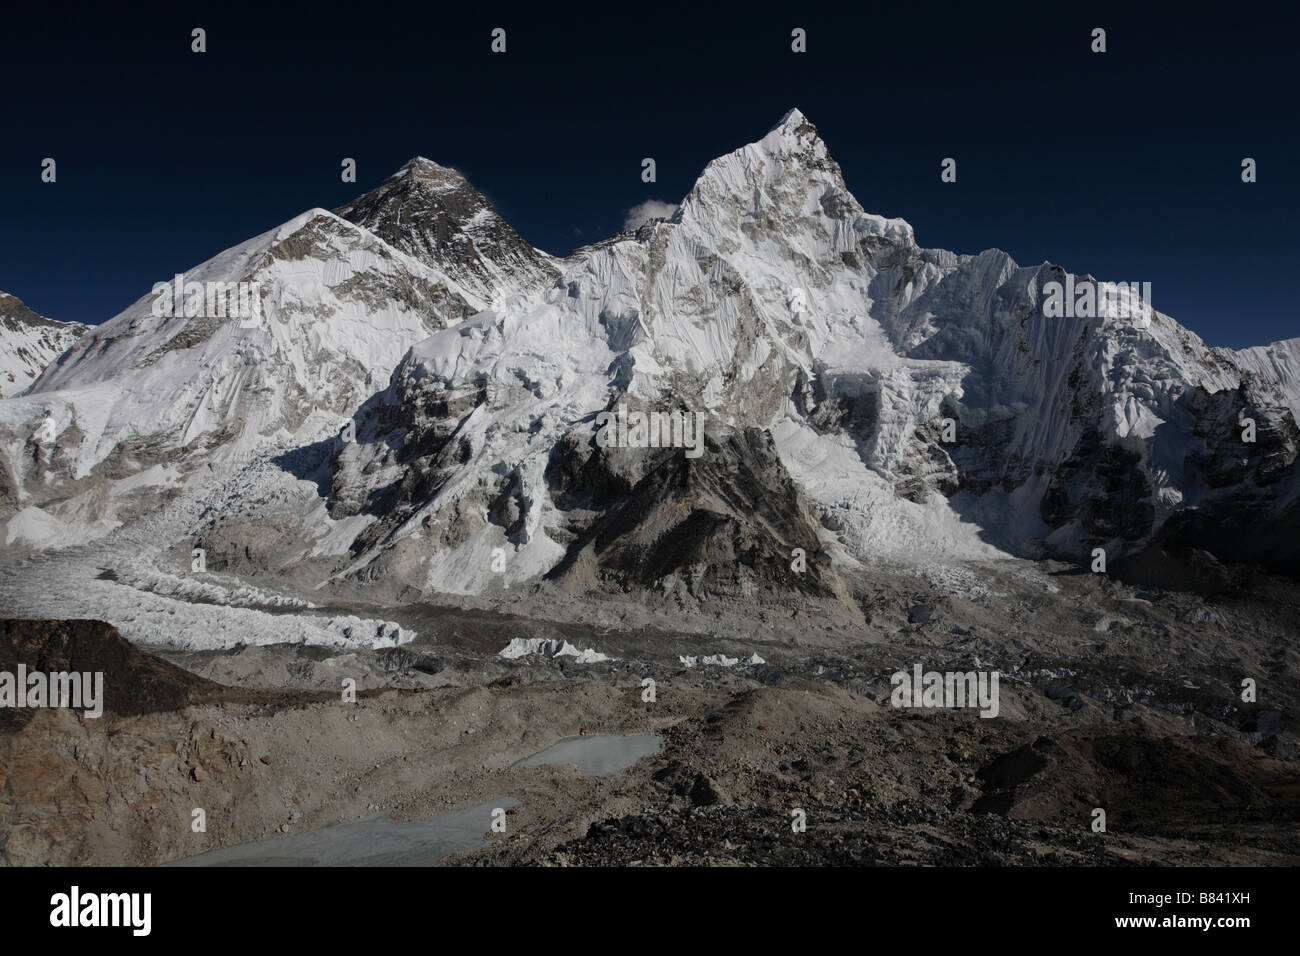 View of the Everest mountain range from the summit of Kala Patthar Stock Photo